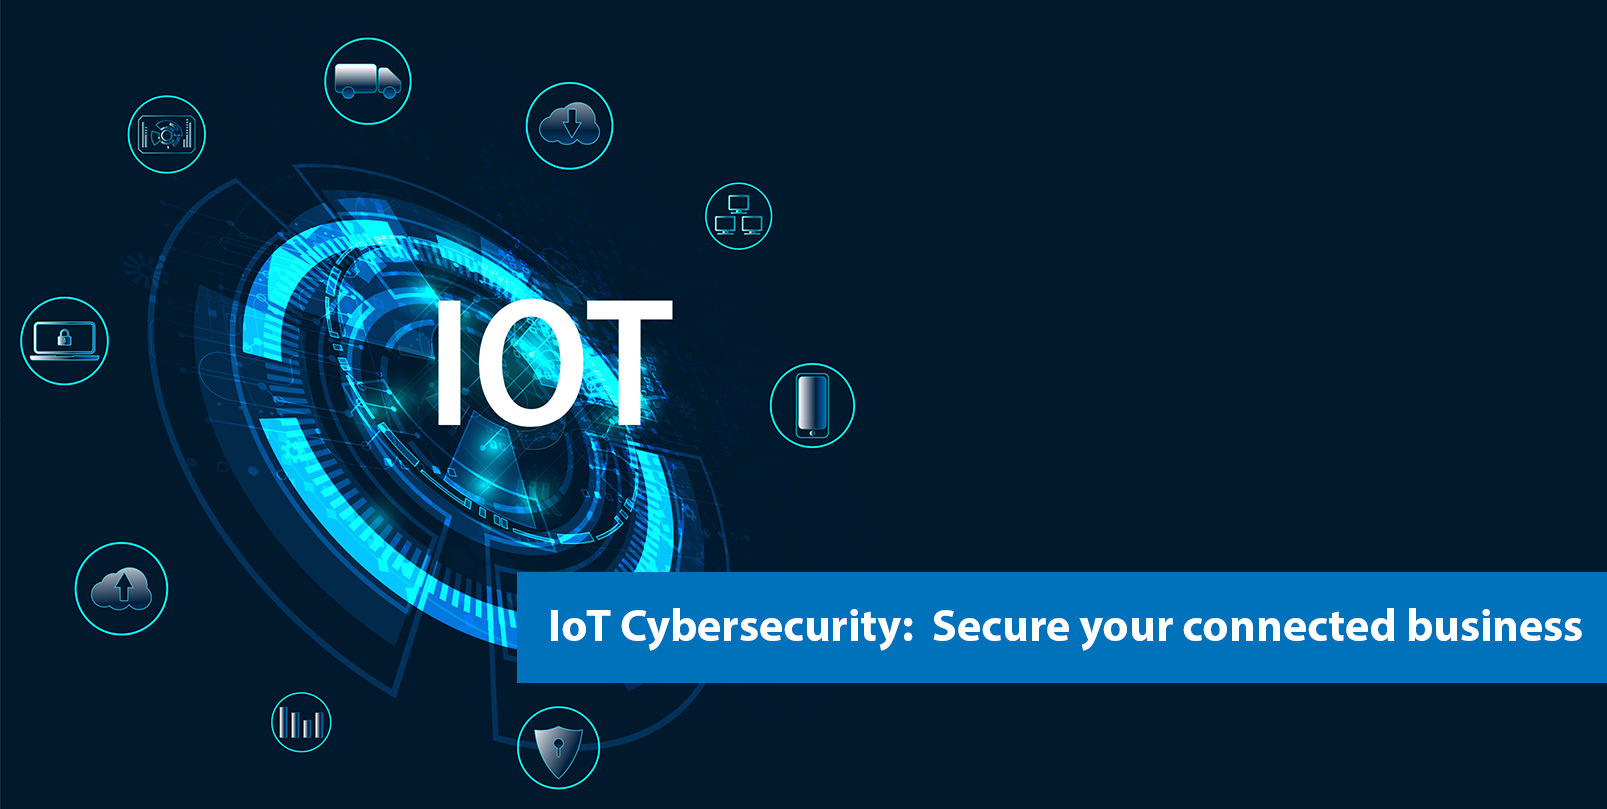 IoT cybersecurity: Secure your connected business